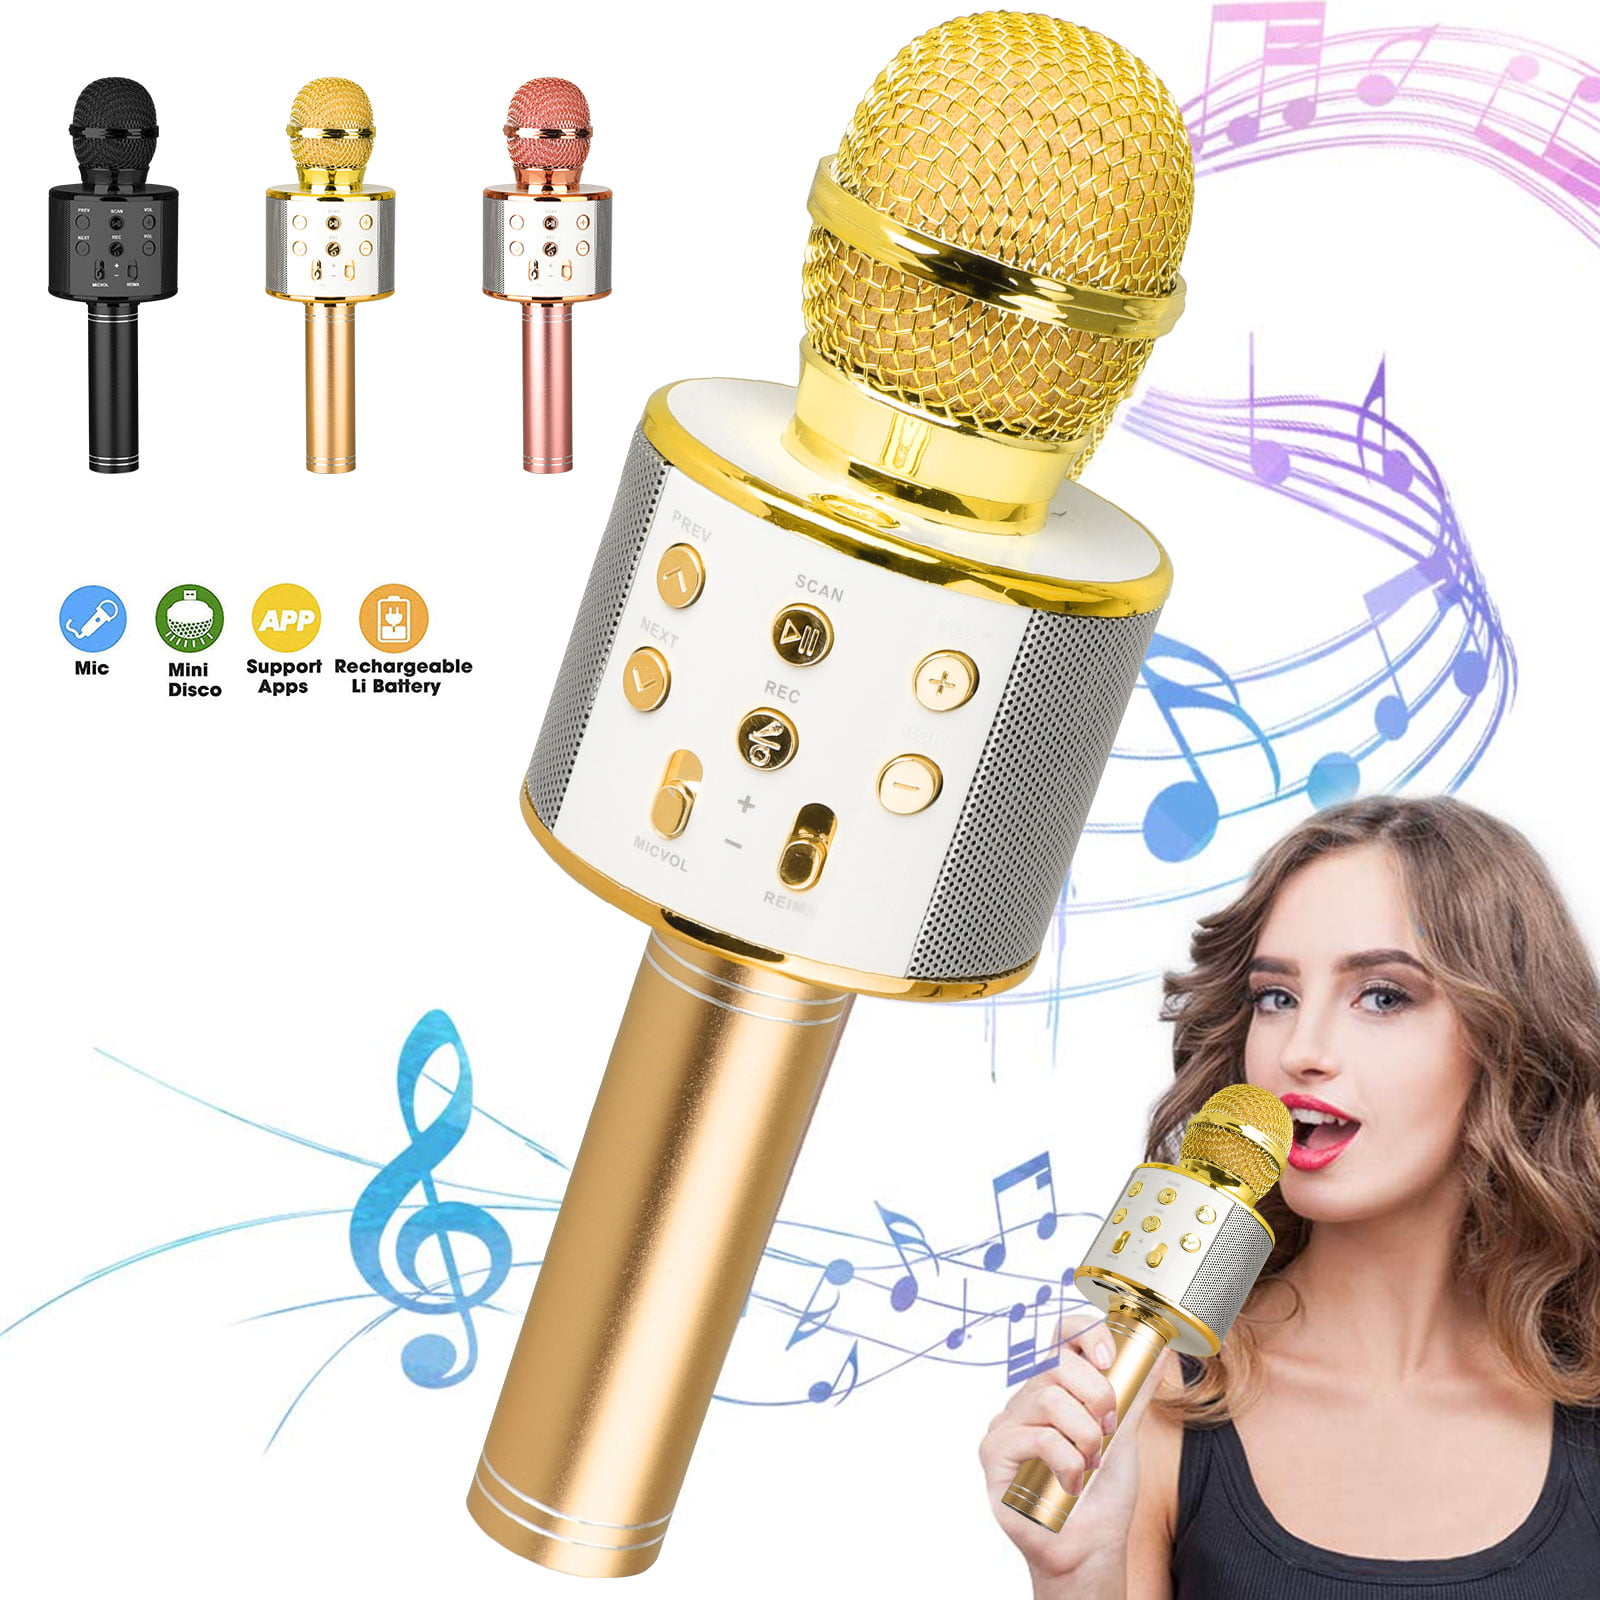 Wireless Bluetooth Karaoke Microphone purple 1 for Android/iPhone/PC Tesoky 4 in 1 Portable Handheld Karaoke Machine Player Speaker Recording Microphone for Kids Adults 